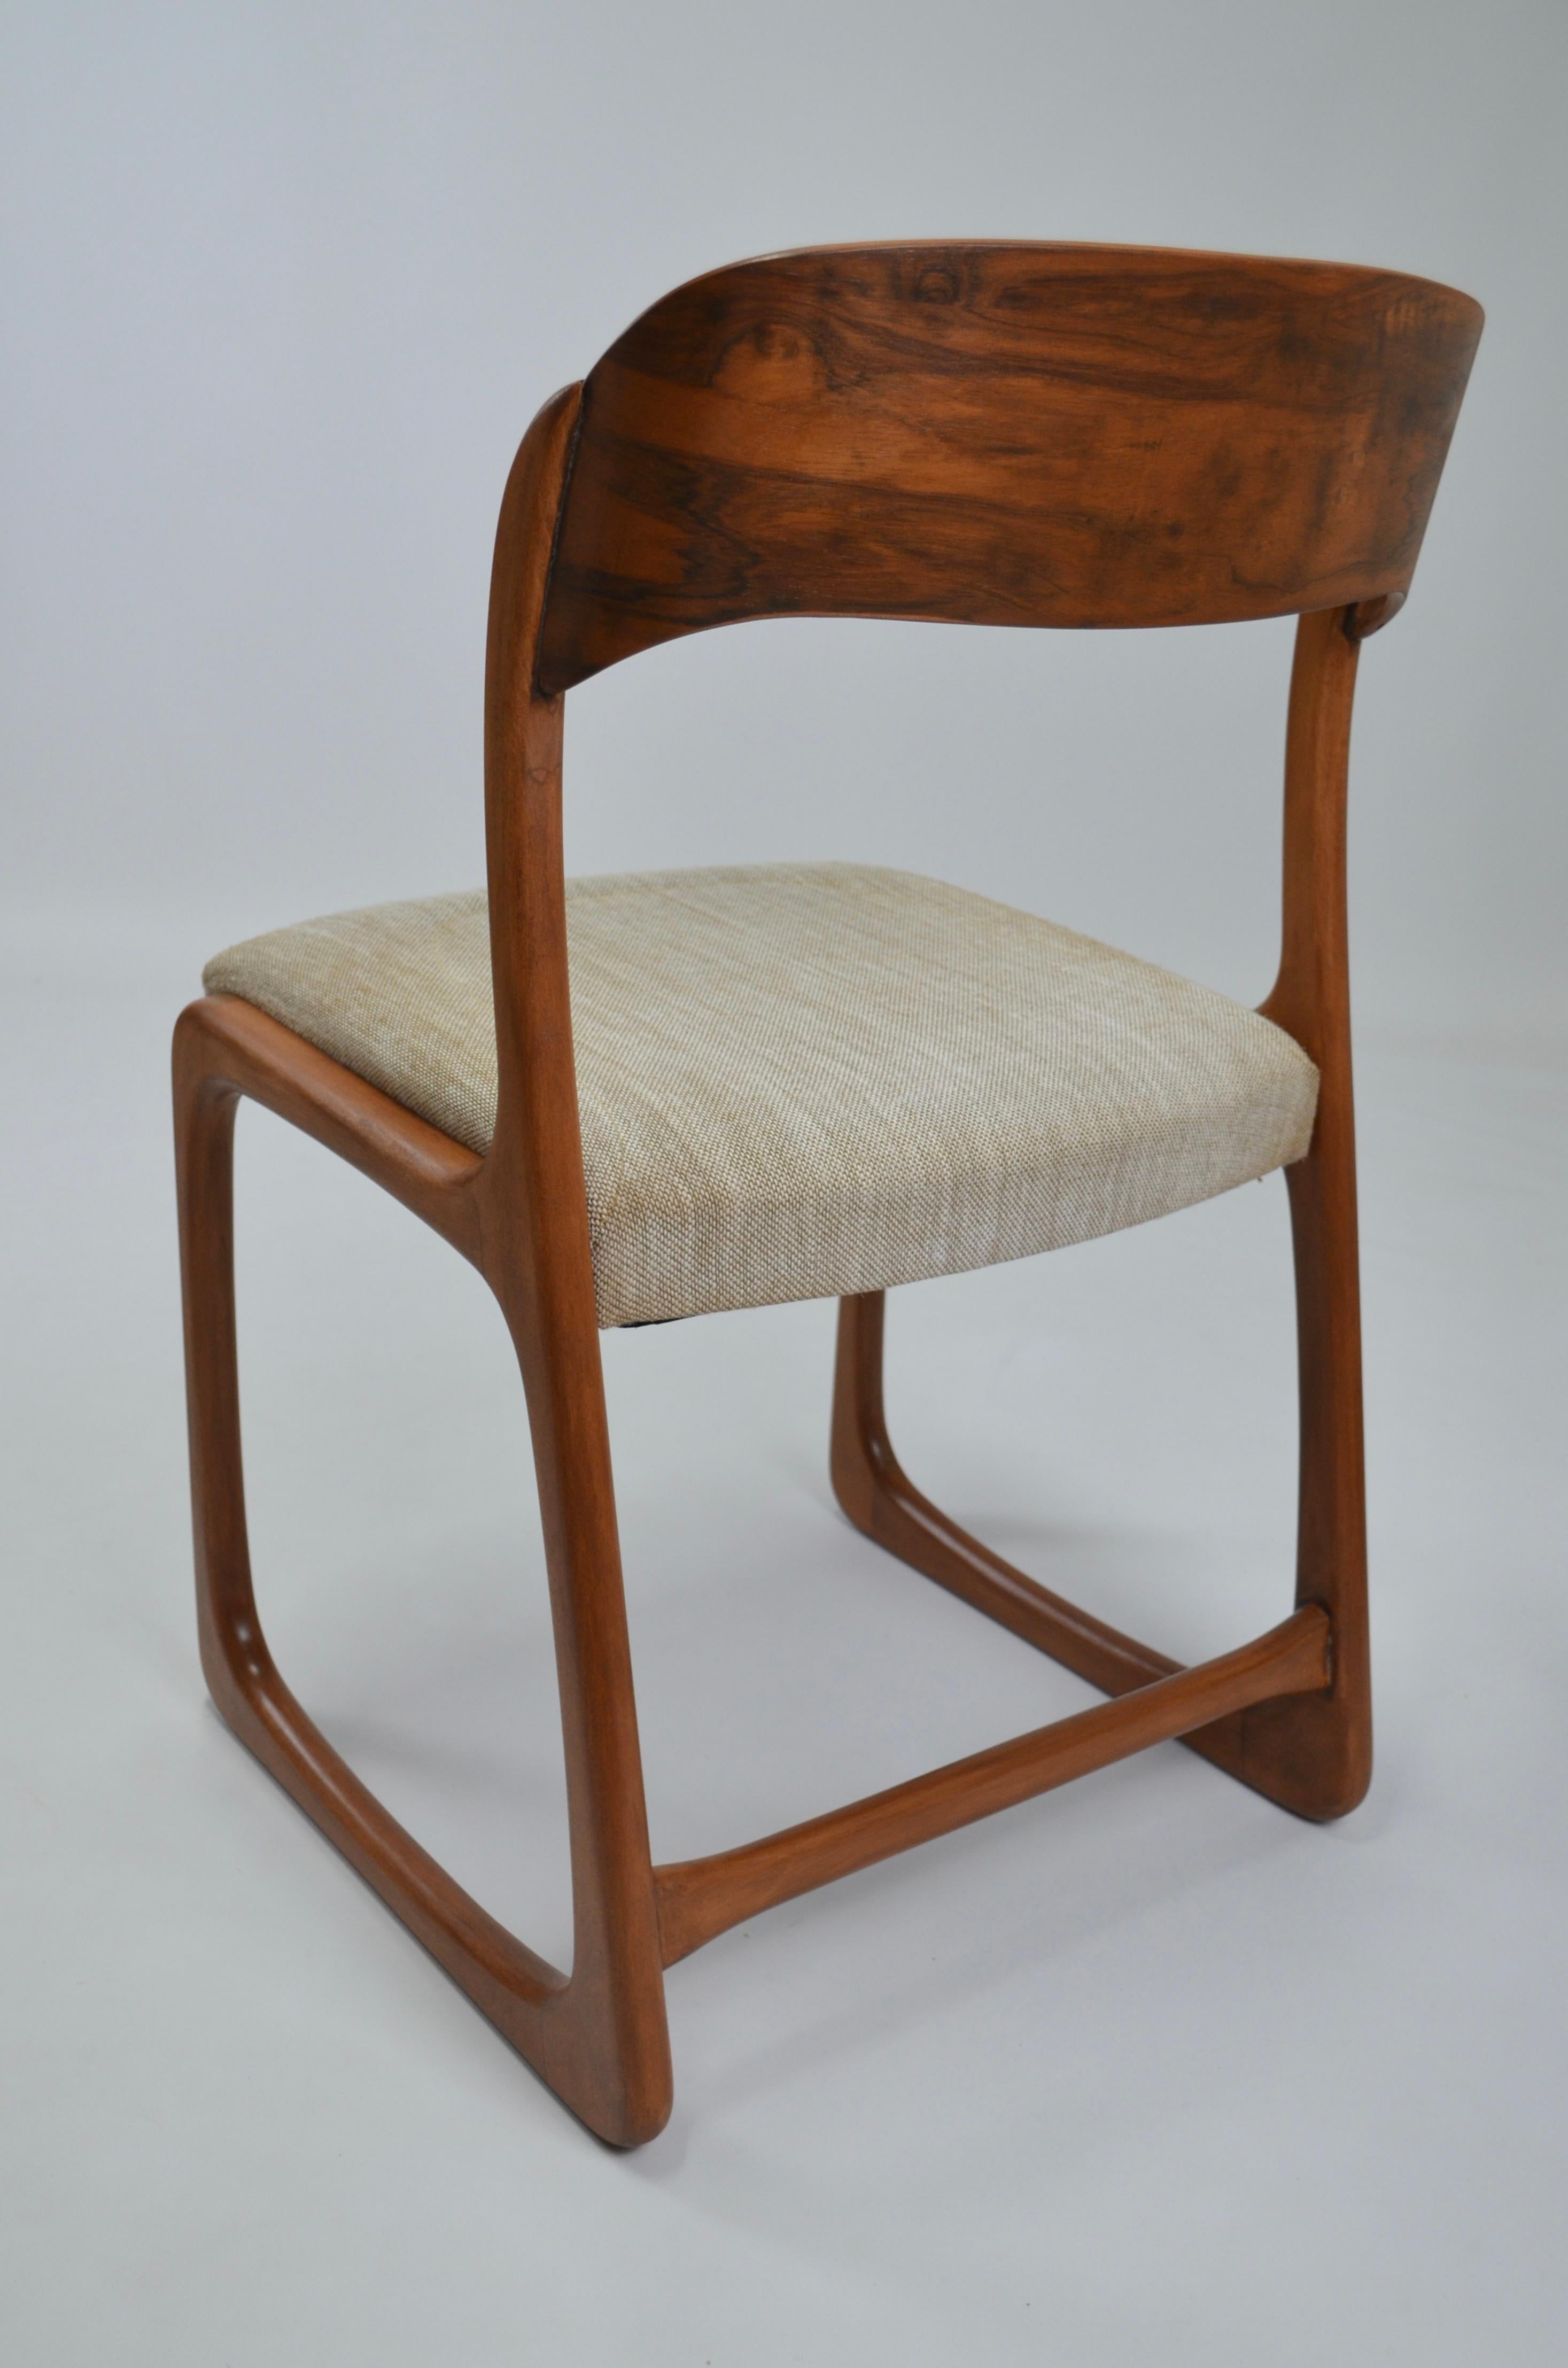 Vintage French Traineau or Sleigh Dining Chairs, Baumann, France, 60s For Sale 9